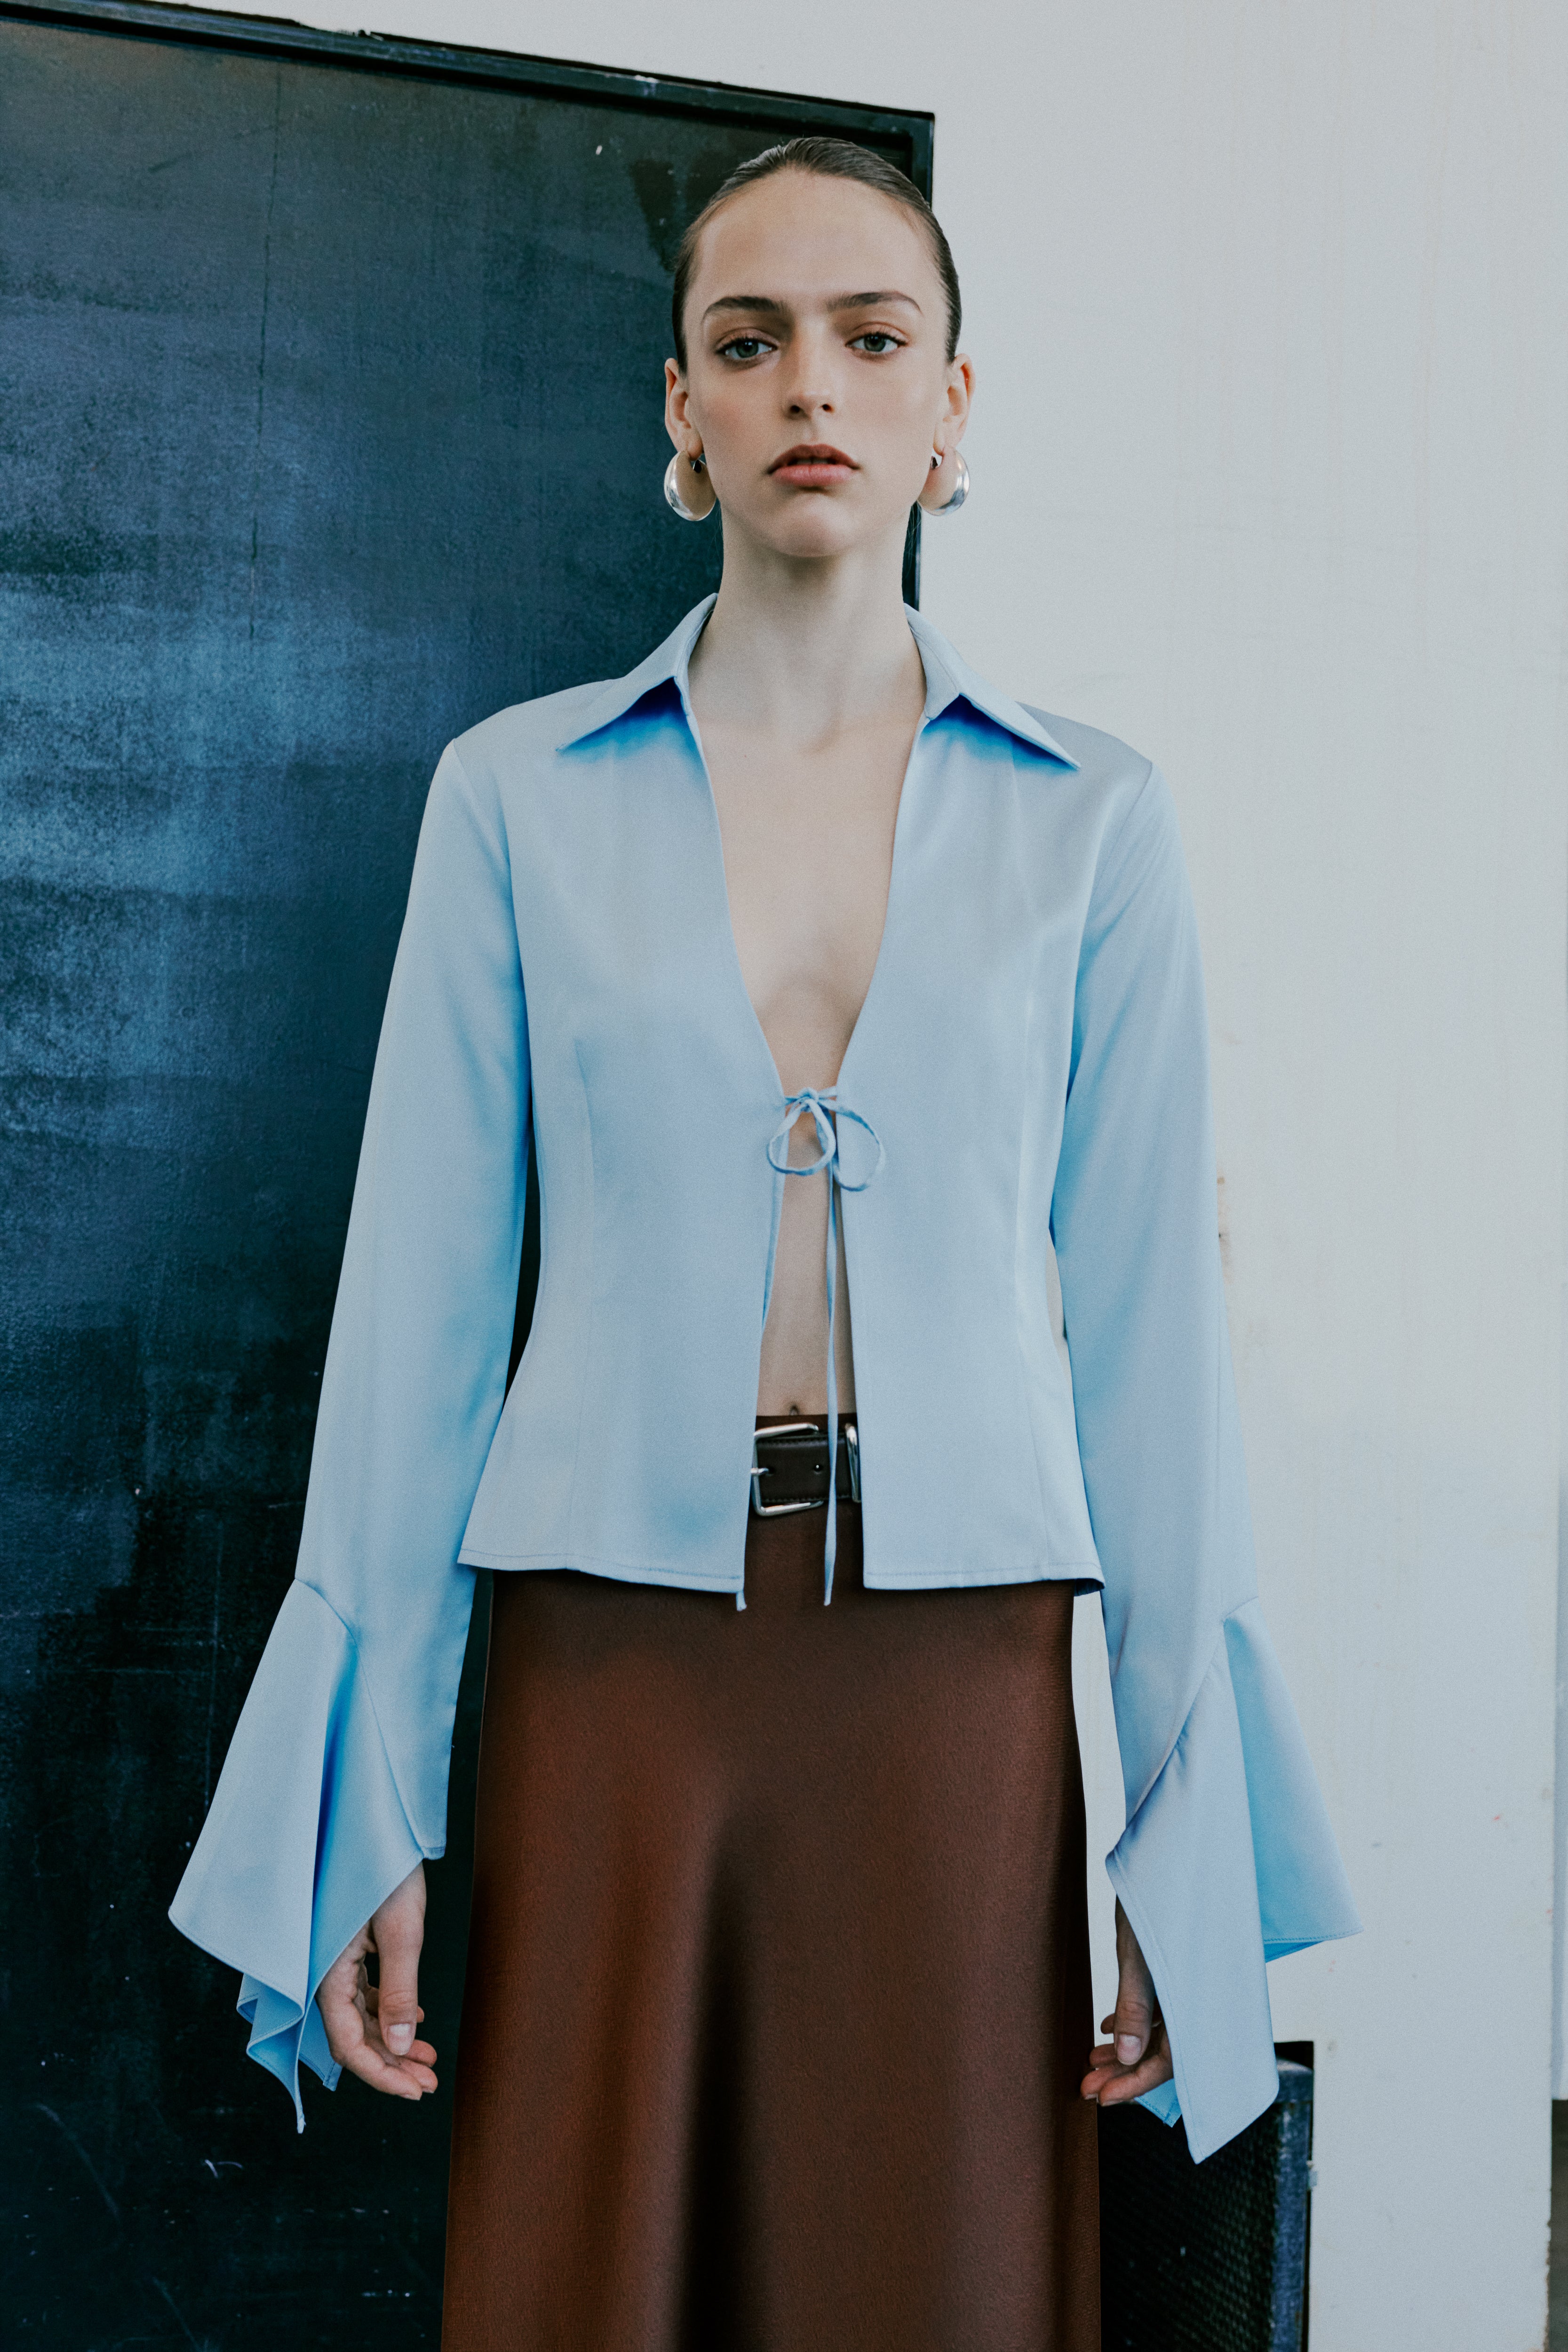 Molly - Satin Shirt With Tie In Front